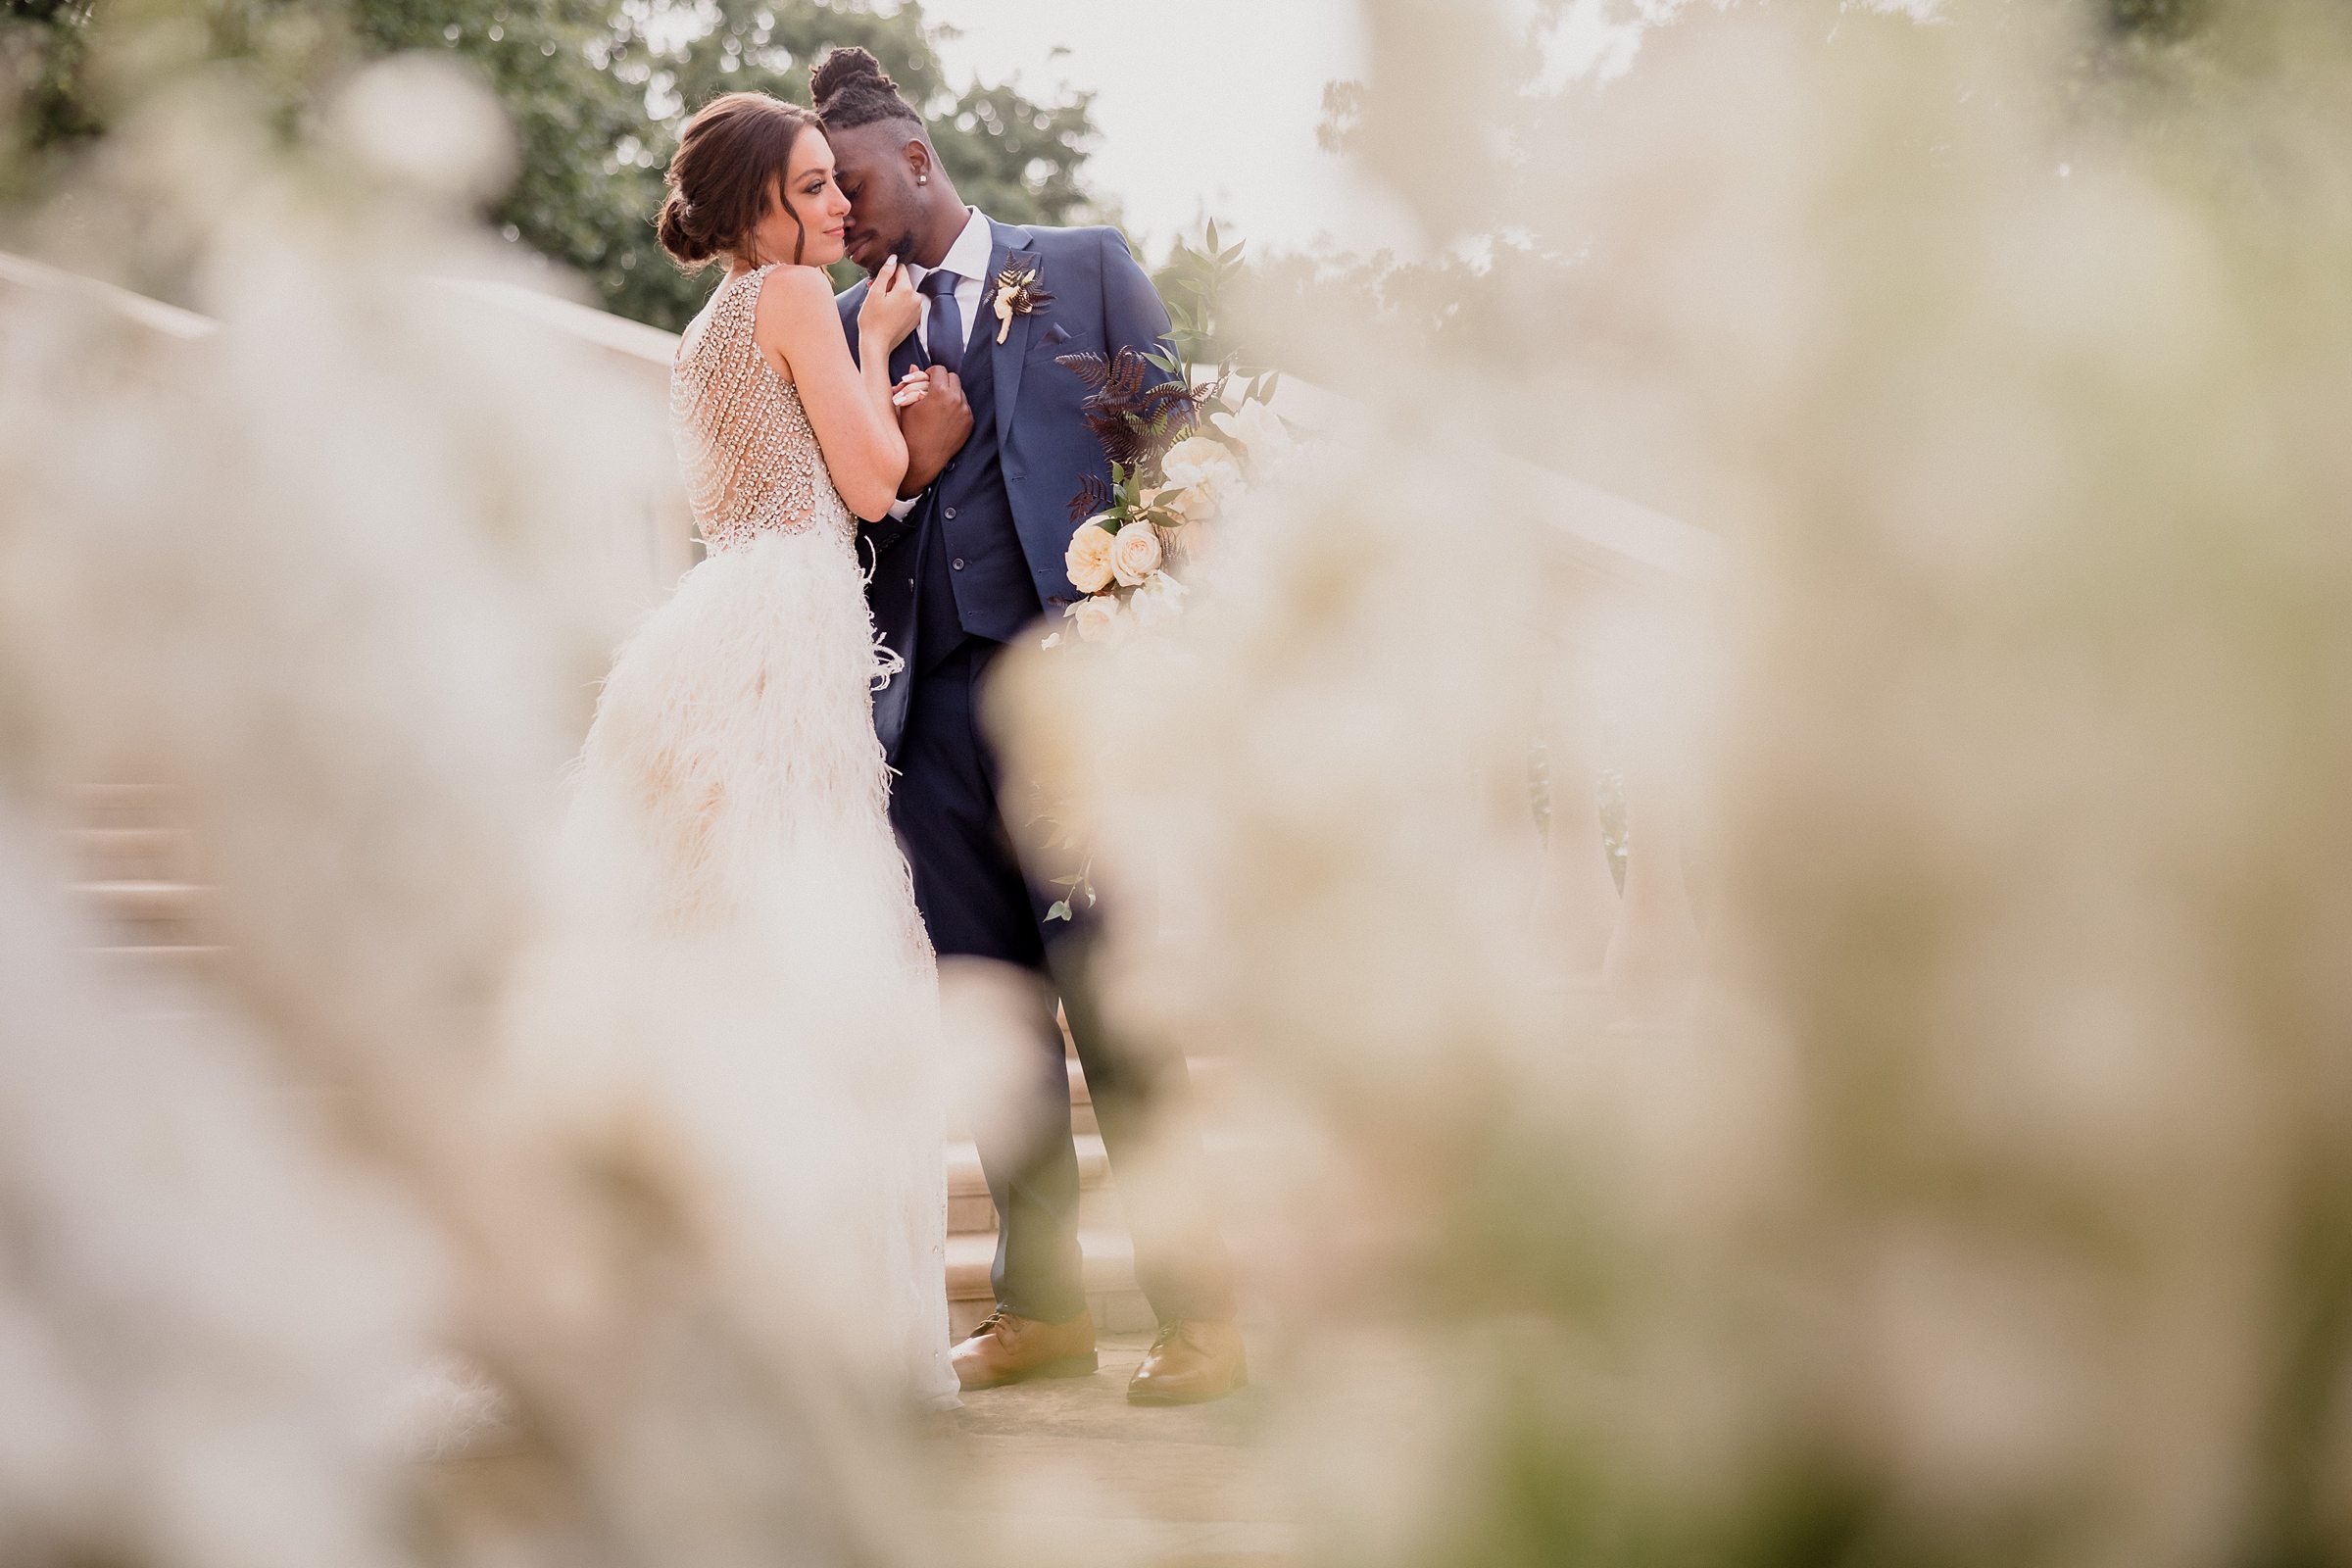 Bride and groom embrace during a wedding at the Olana Wedding Venue in Hickory Creek, Texas.